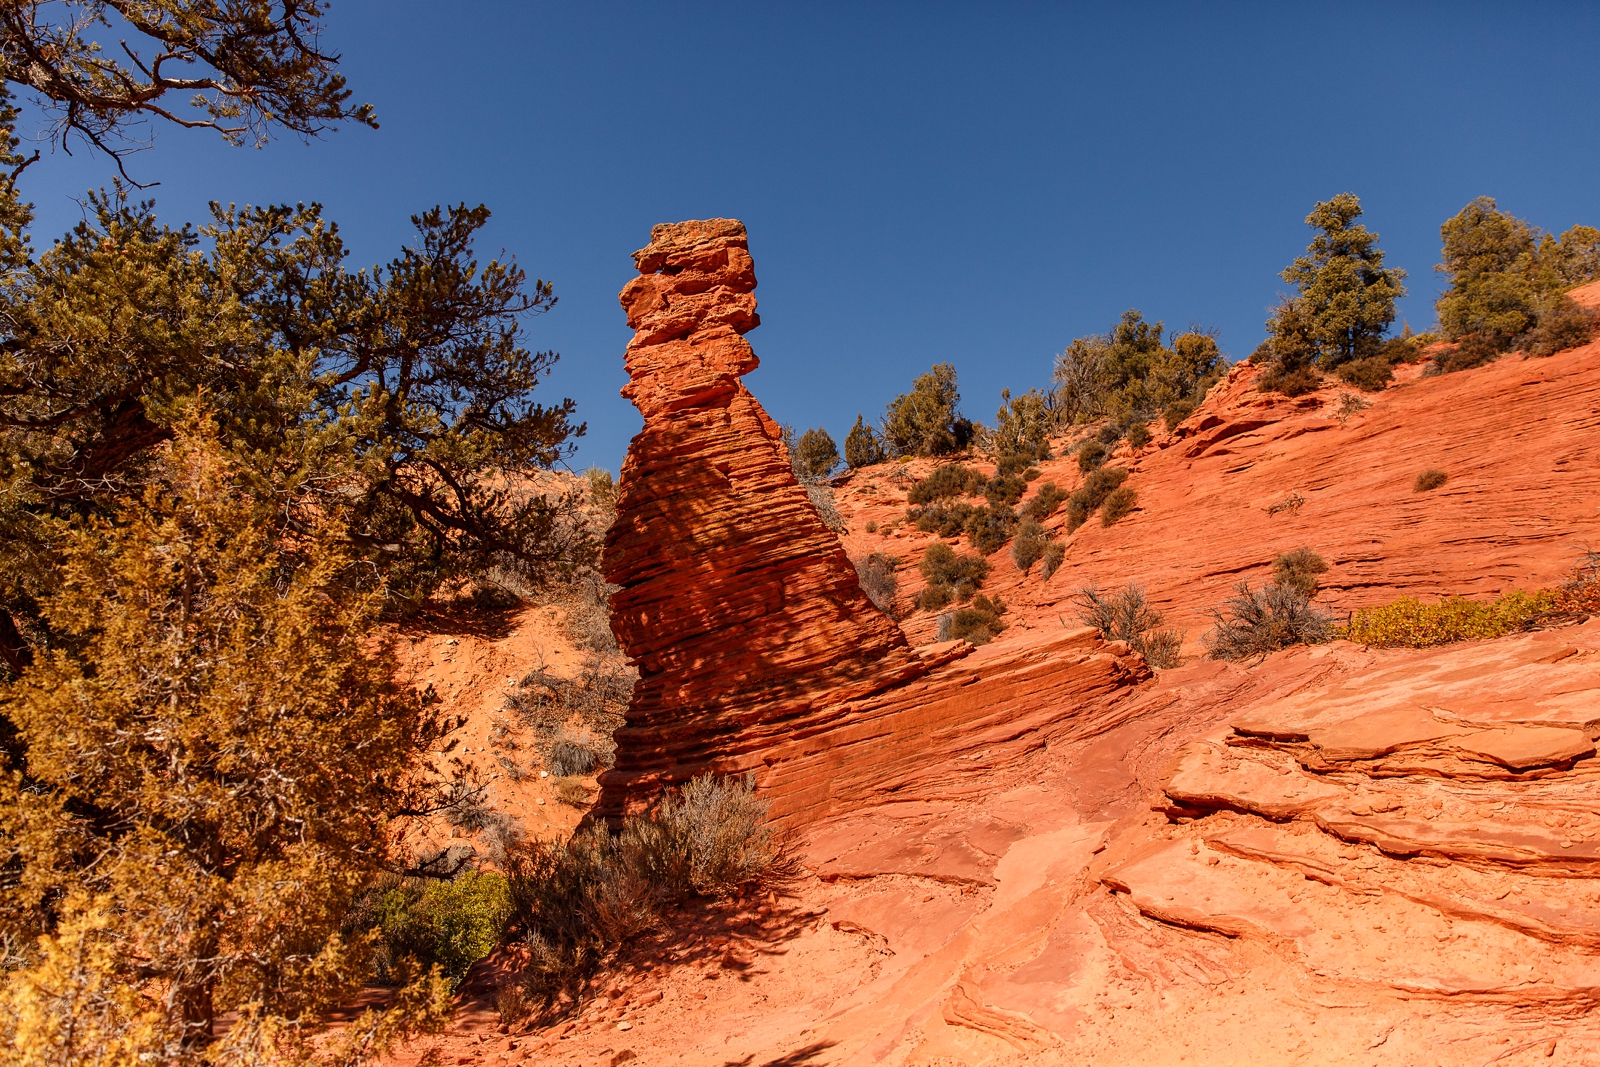 Secret hoodoo - a perfect place to elope in Southern Utah.